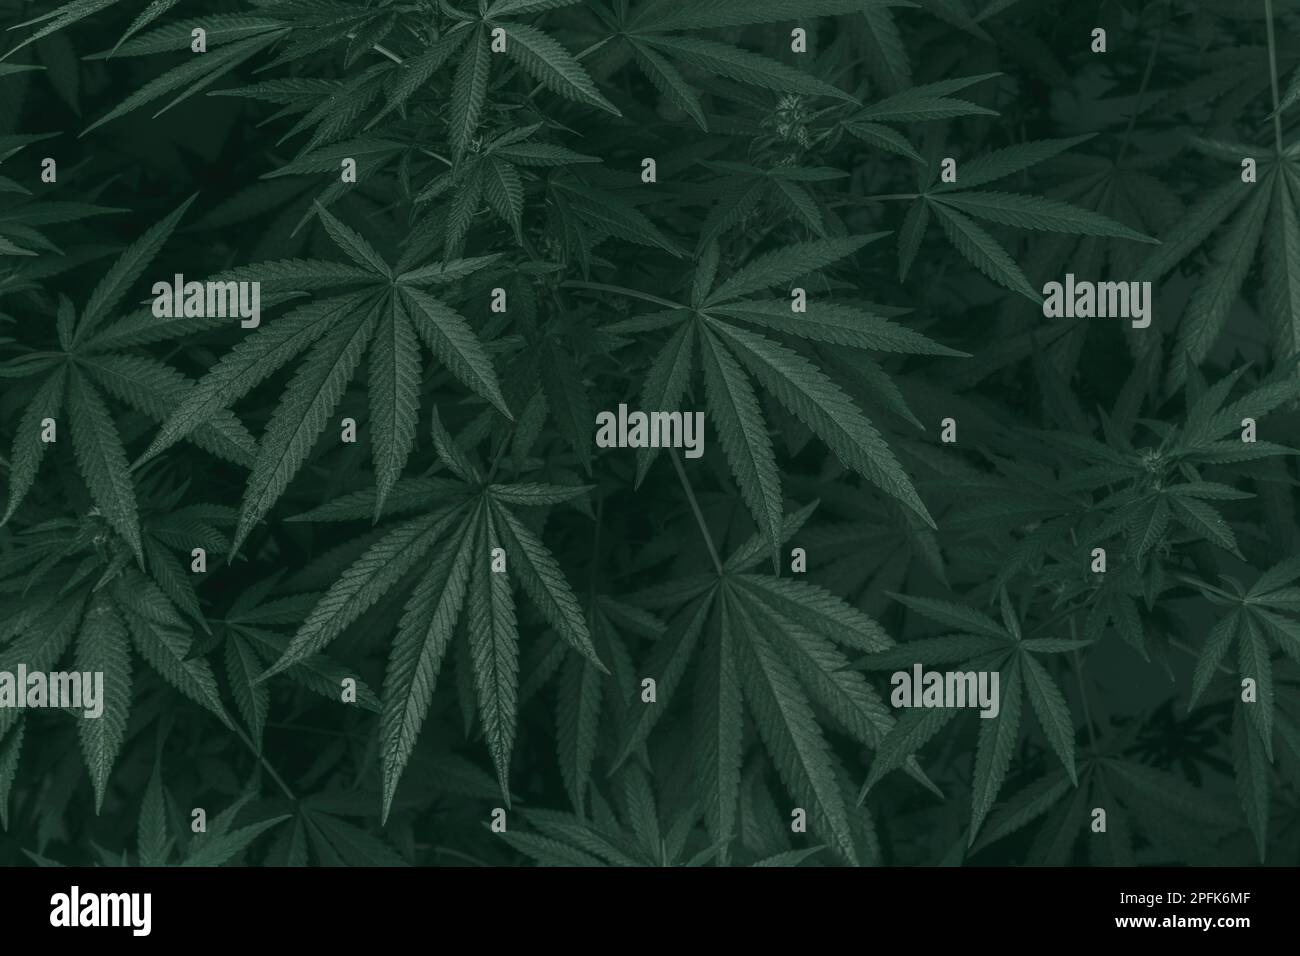 https://c8.alamy.com/comp/2PFK6MF/weed-texture-for-background-marijuana-plant-cannabis-leaves-in-a-horizontal-composition-2PFK6MF.jpg